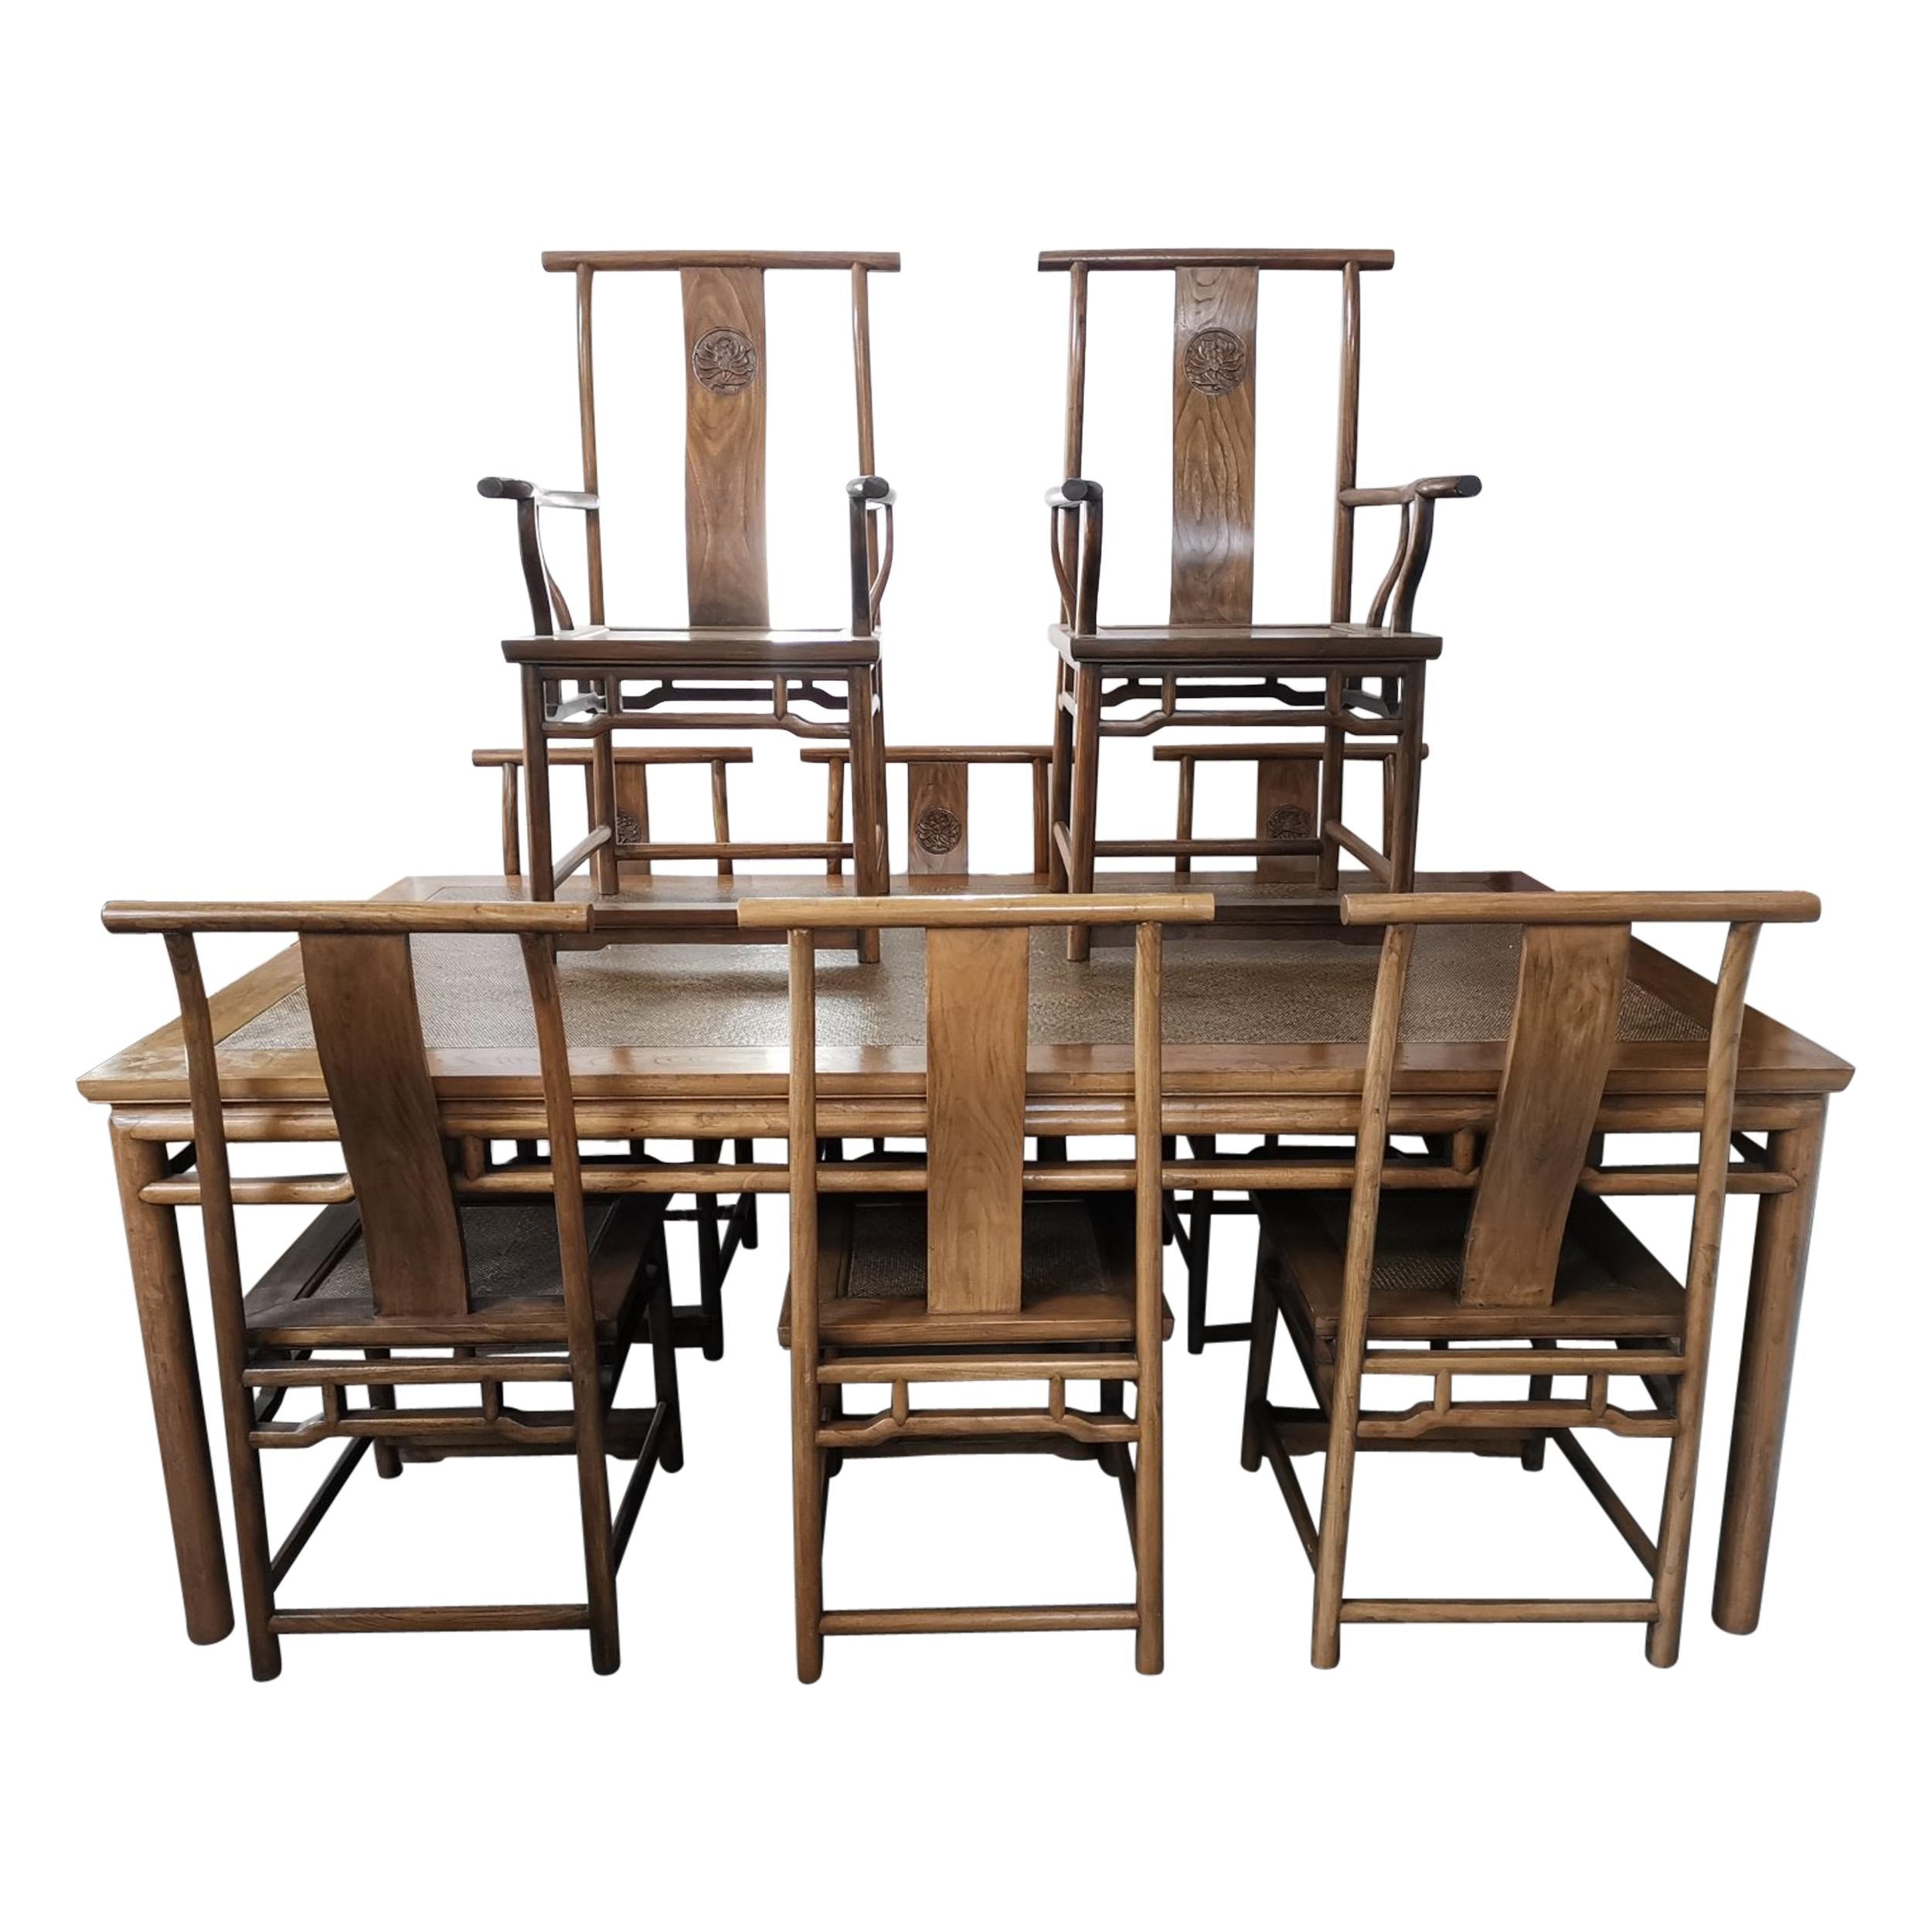 Chinese Hard Wood Dining Table & Eight Matching Chairs all with Stylized Carving